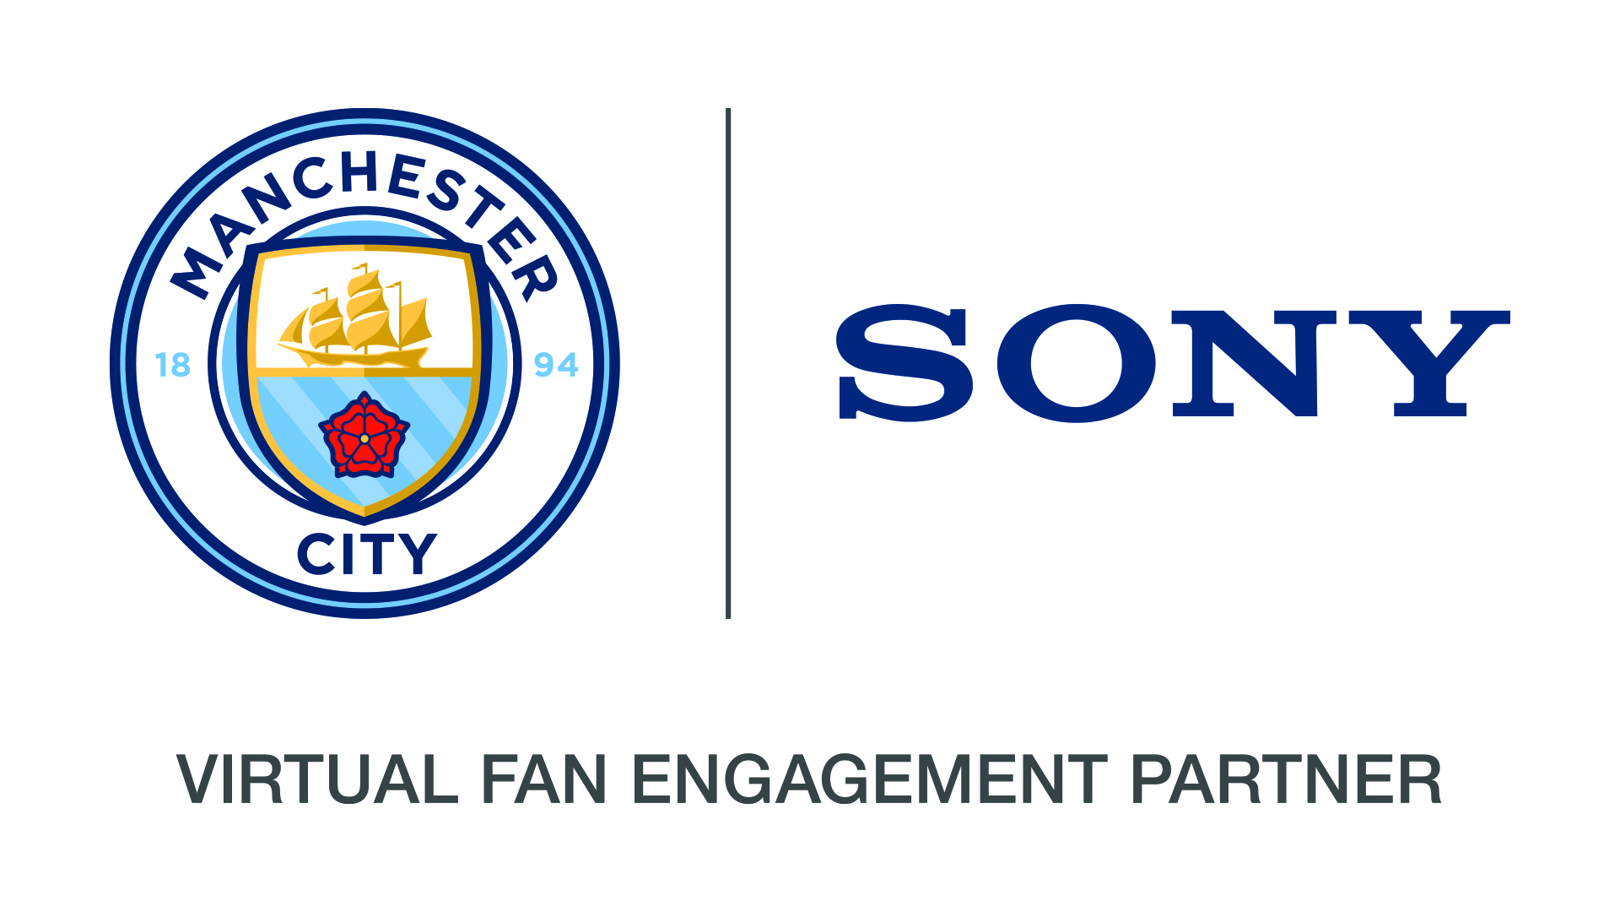 Manchester City partner with Sony to develop digital fan experiences